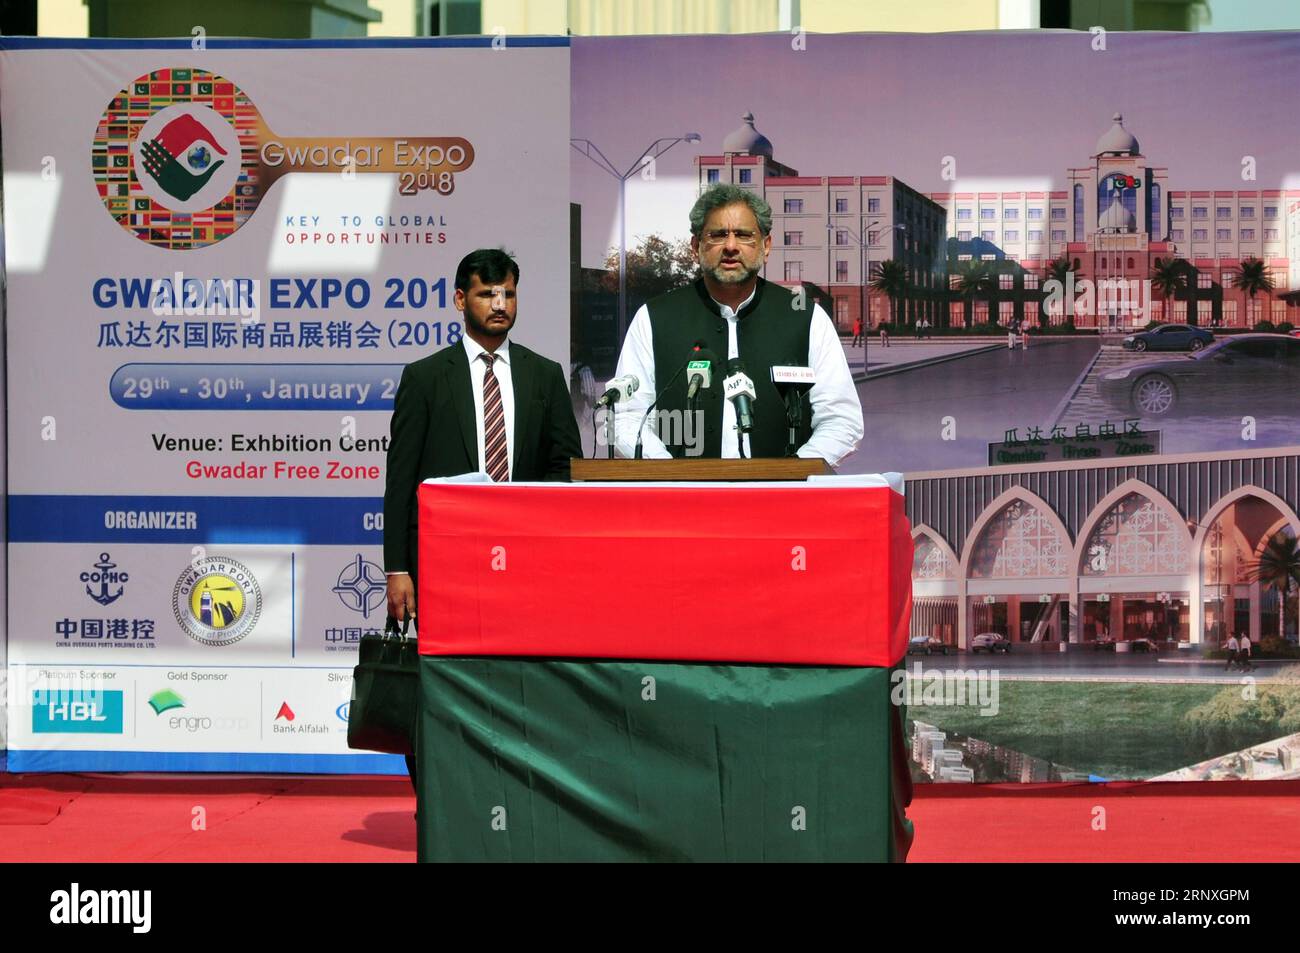 (180129) -- GWADAR, Jan. 29, 2018 -- Pakistani Prime Minister Shahid Khaqan Abbasi (front) addresses during the inauguration ceremony of first phase of Gwadar Port s Free Zone in southwest Pakistan s Gwadar on Jan. 29, 2018. The first phase of Gwadar Port s Free Zone in southwestern Pakistan was inaugurated on Monday by Prime Minister Shahid Khaqan Abbasi, who commented that the free zone would help facilitate regional and global trade under the China-Pakistan Economic Corridor (CPEC). ) (psw) PAKISTAN-GWADAR-FREE ZONE AhmadxKamal PUBLICATIONxNOTxINxCHN Stock Photo